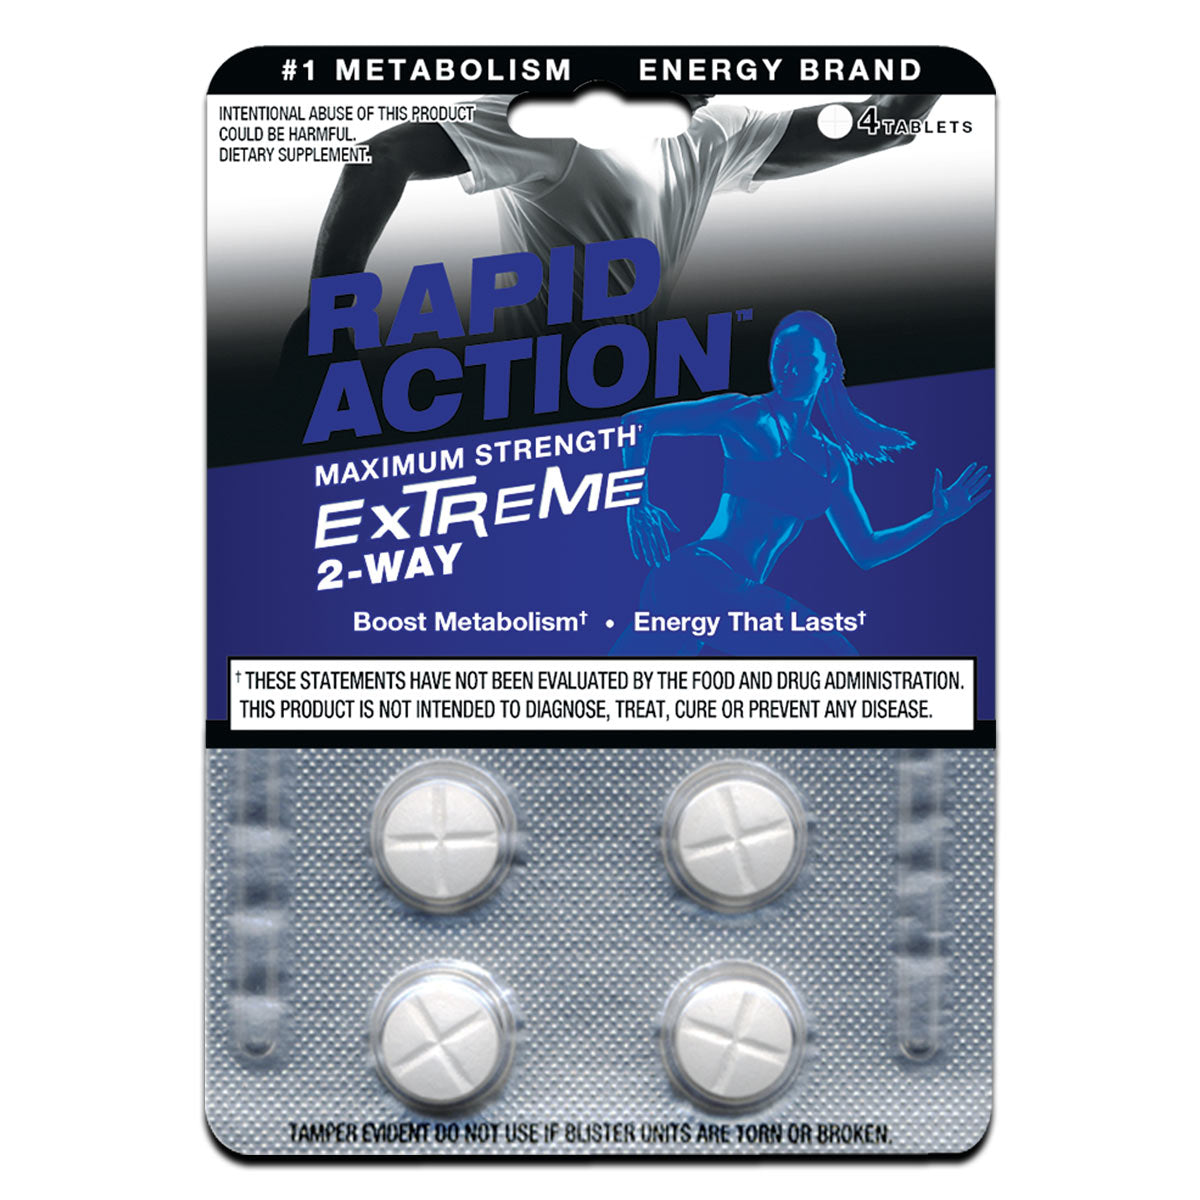 Rapid Action EXTREME 2-Way Maximum Strength Energy Pills - Boost Metabolism (4 Tabs) 10-772-4CT